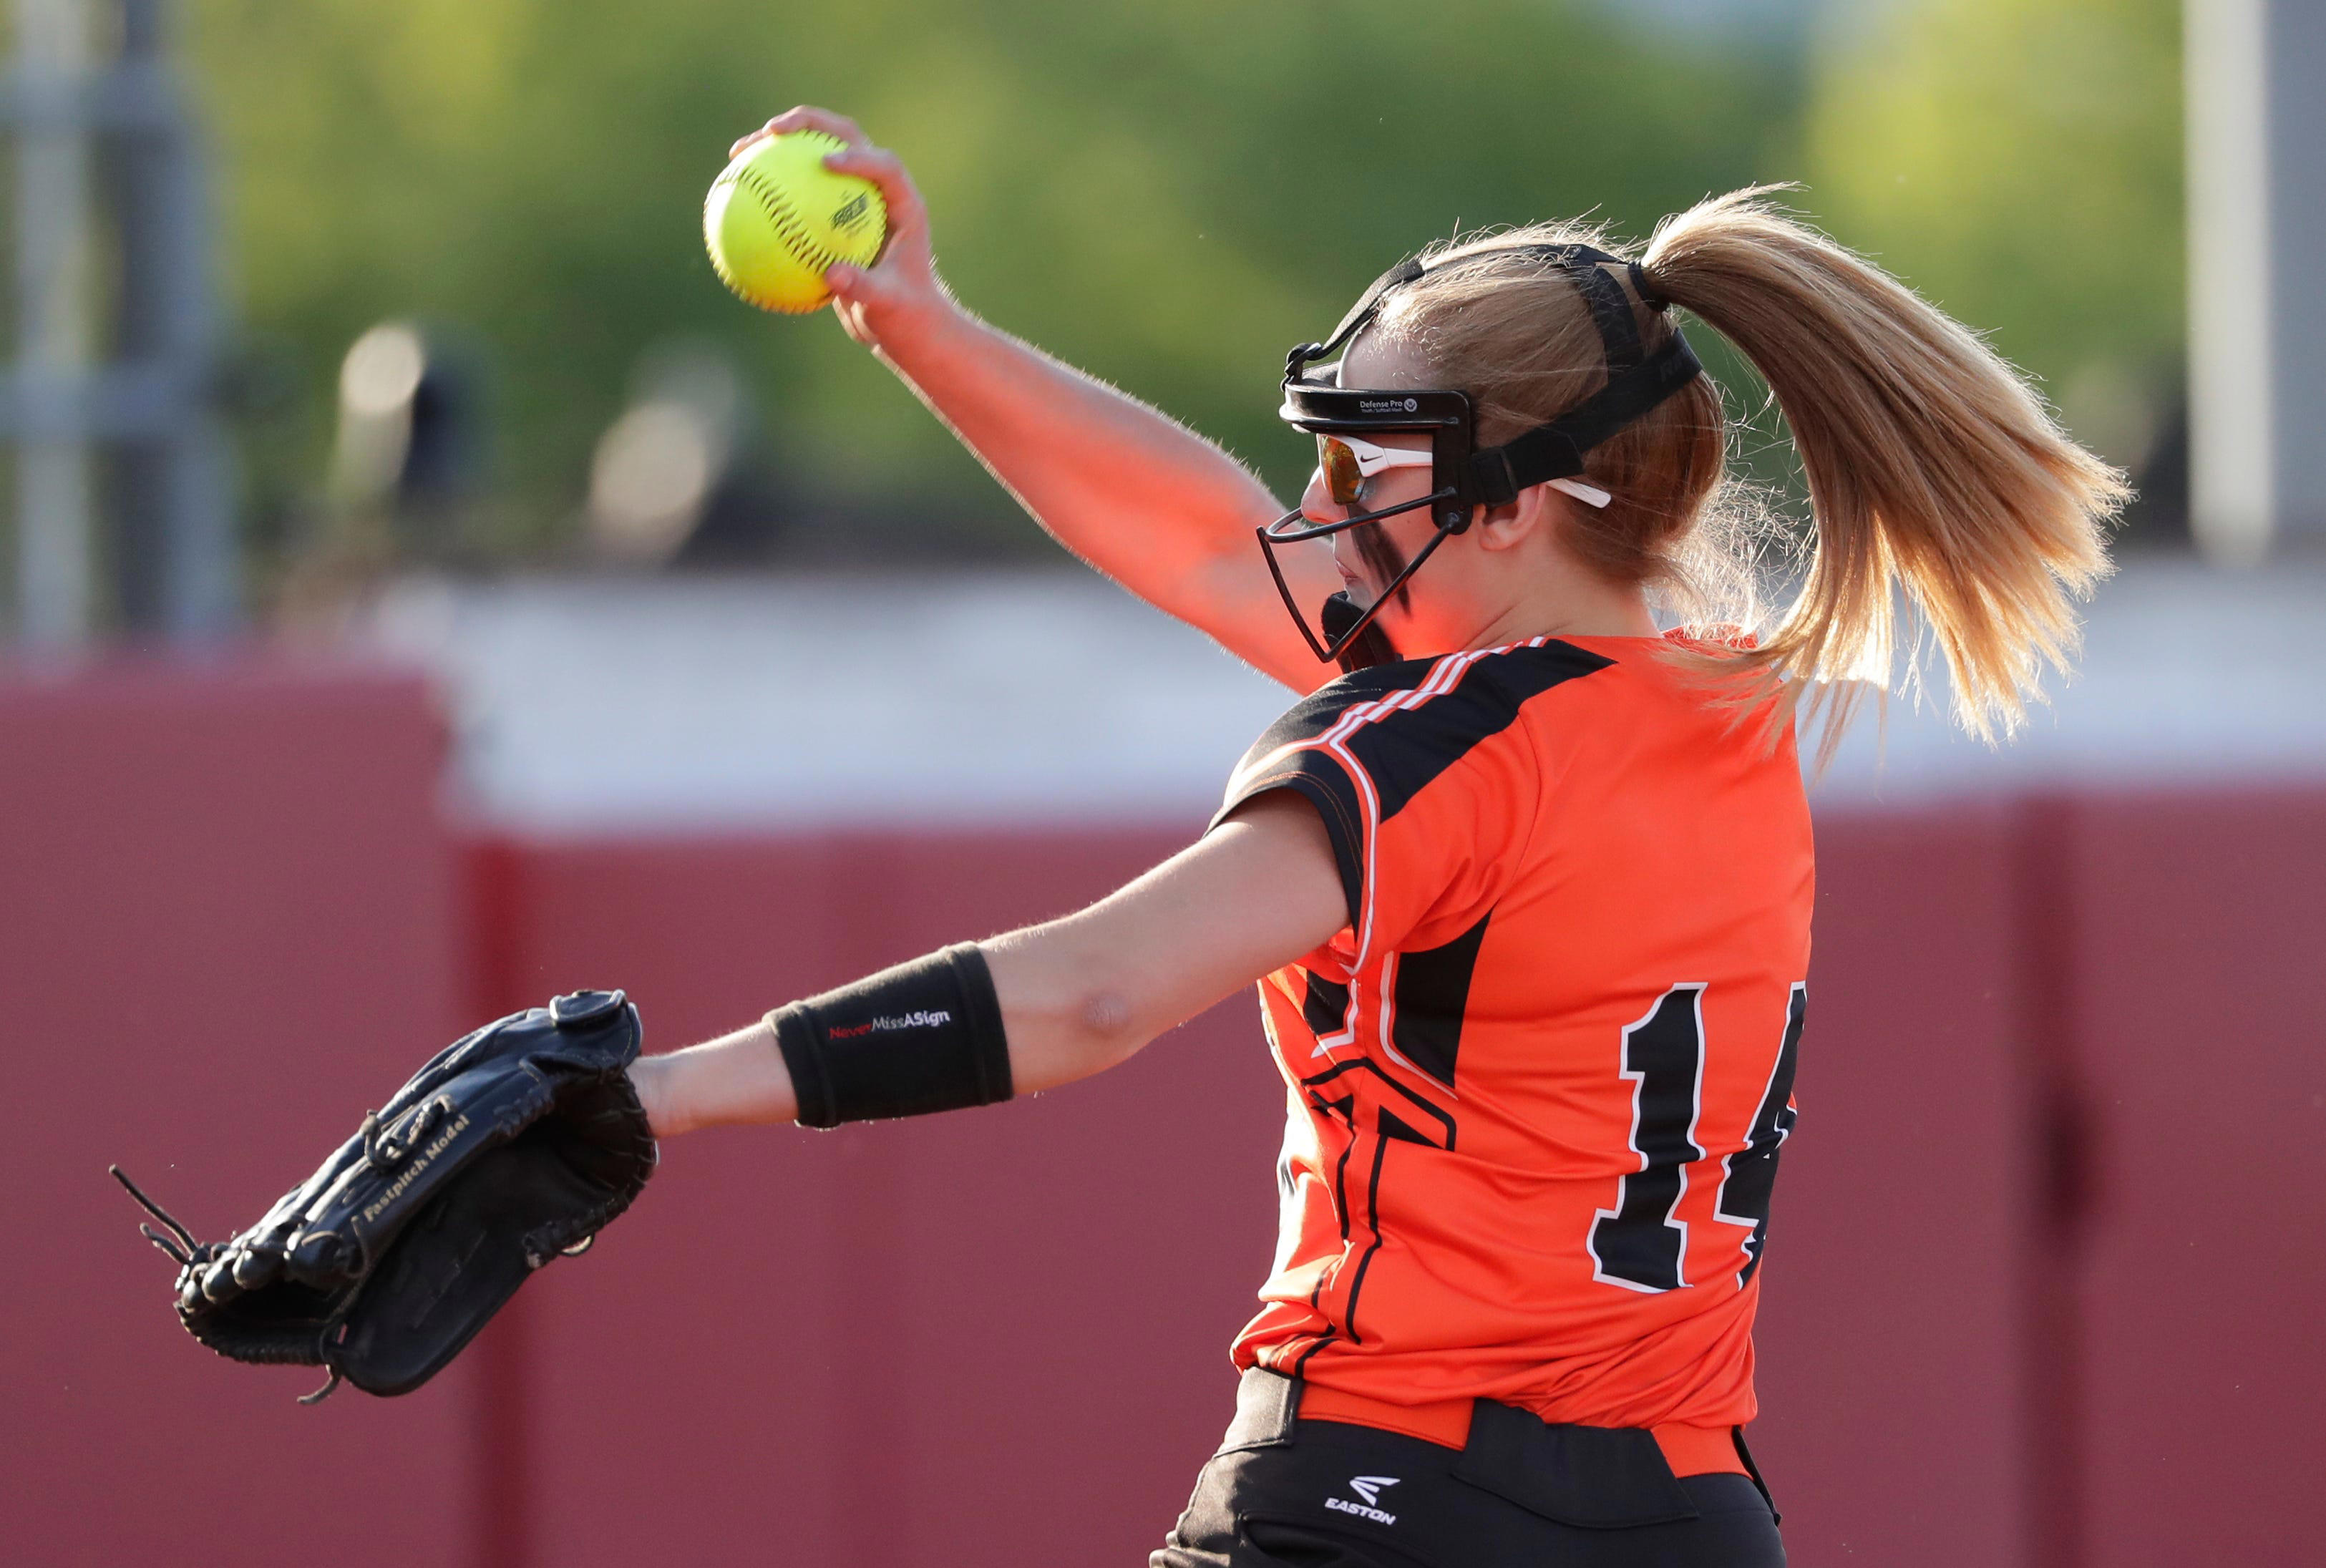 Here's a look at the four central Wisconsin high school softball teams